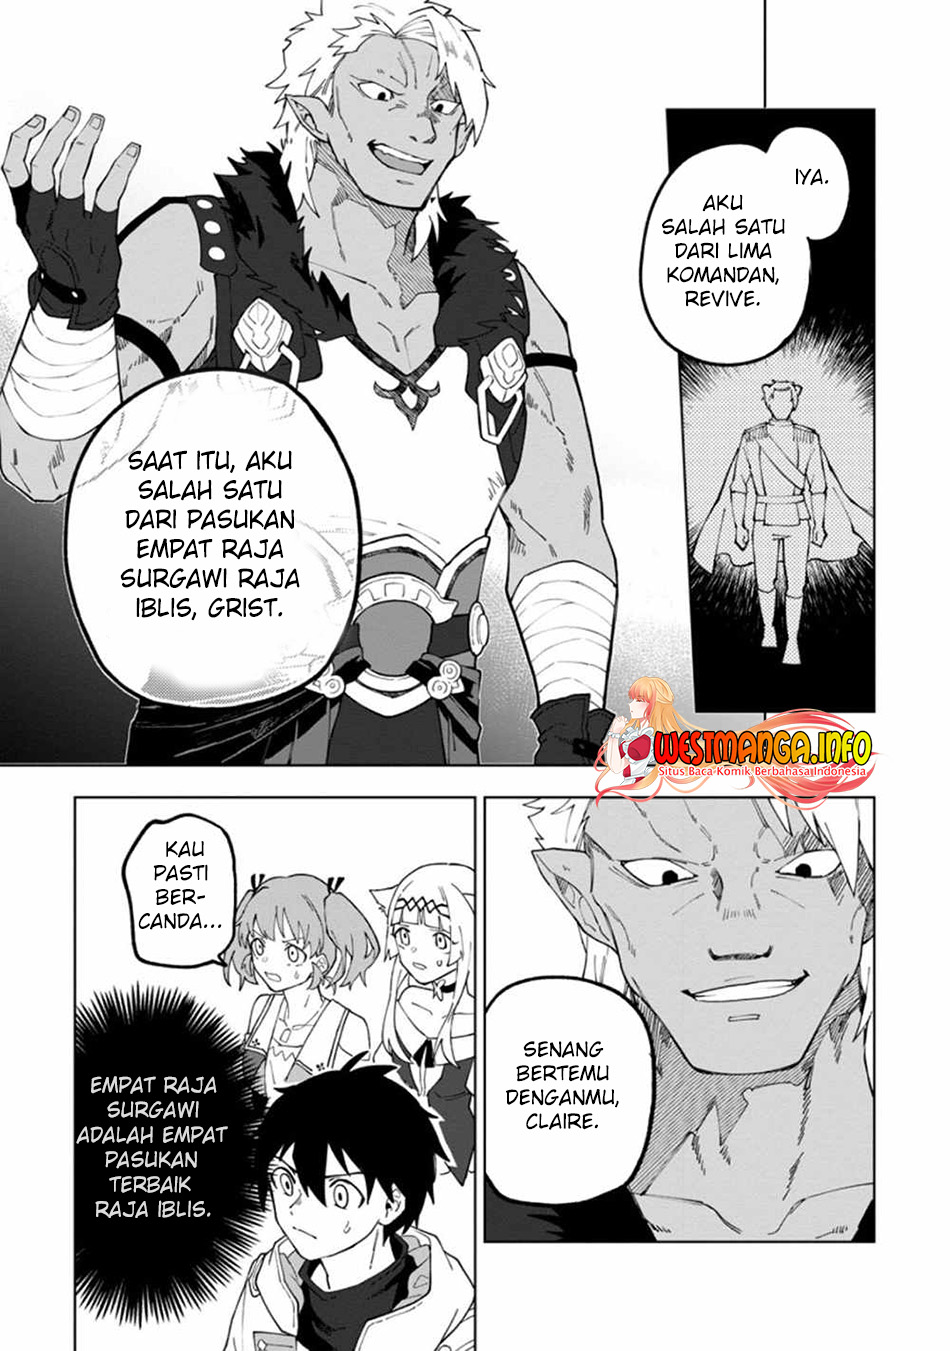 The White Mage Who Was Banished From the Hero’s Party Is Picked up by an S Rank Adventurer ~ This White Mage Is Too Out of the Ordinary! Chapter 15